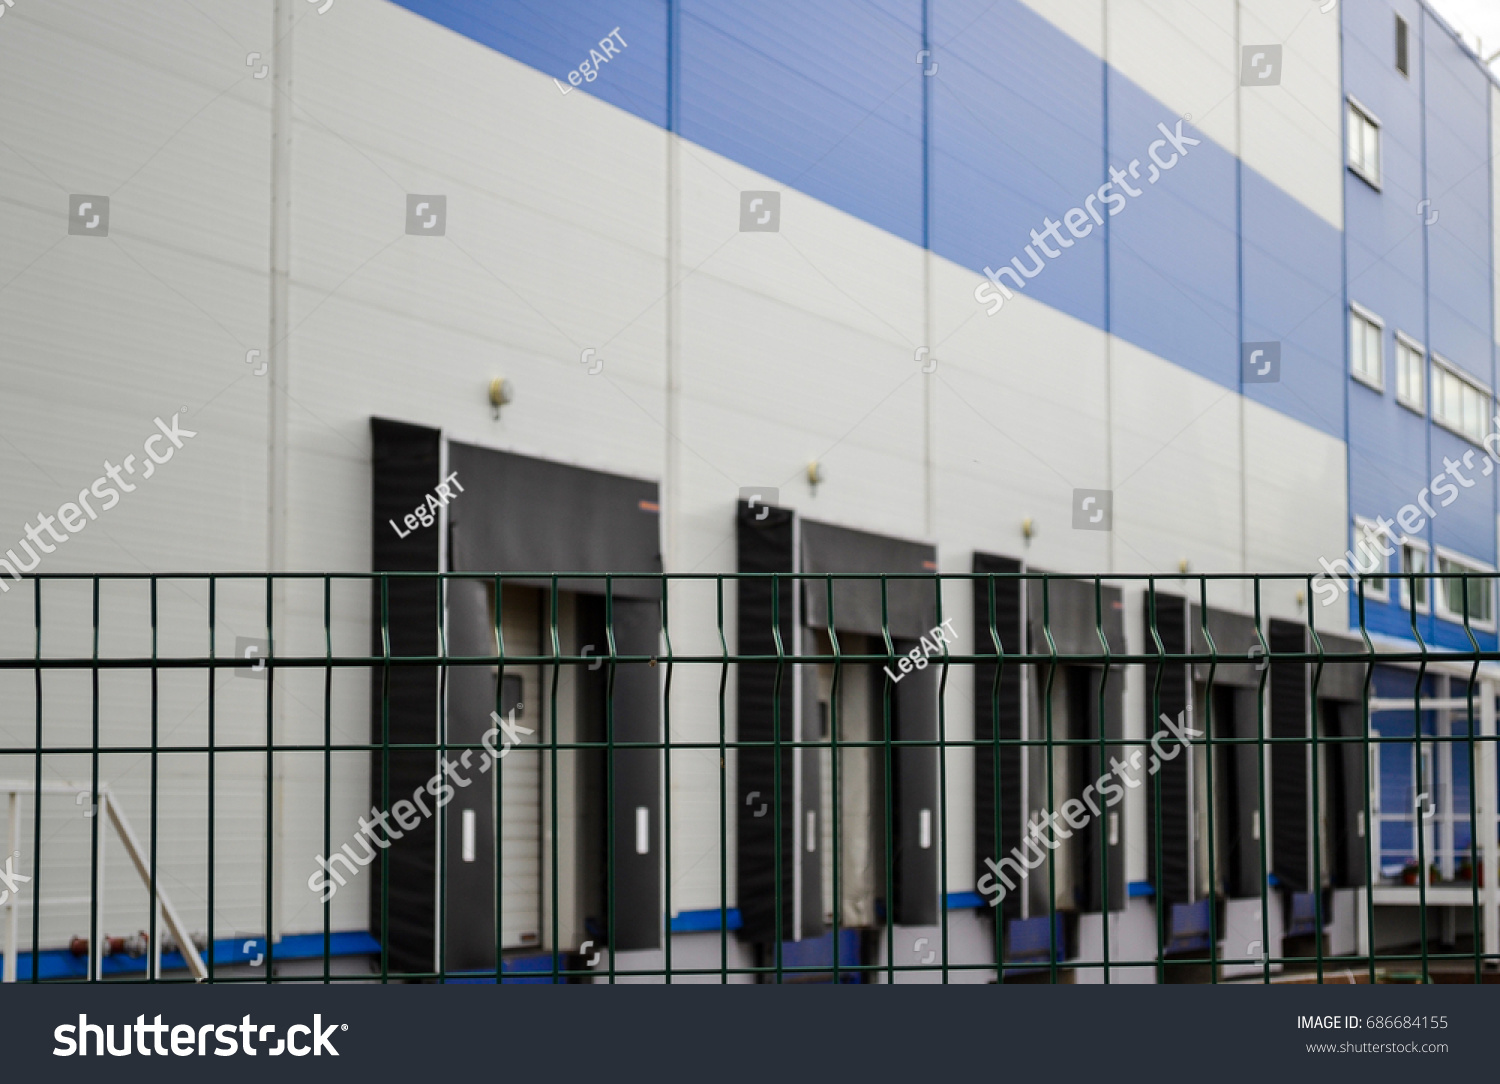 Large distribution warehouse in the background behind a latticed fence #686684155